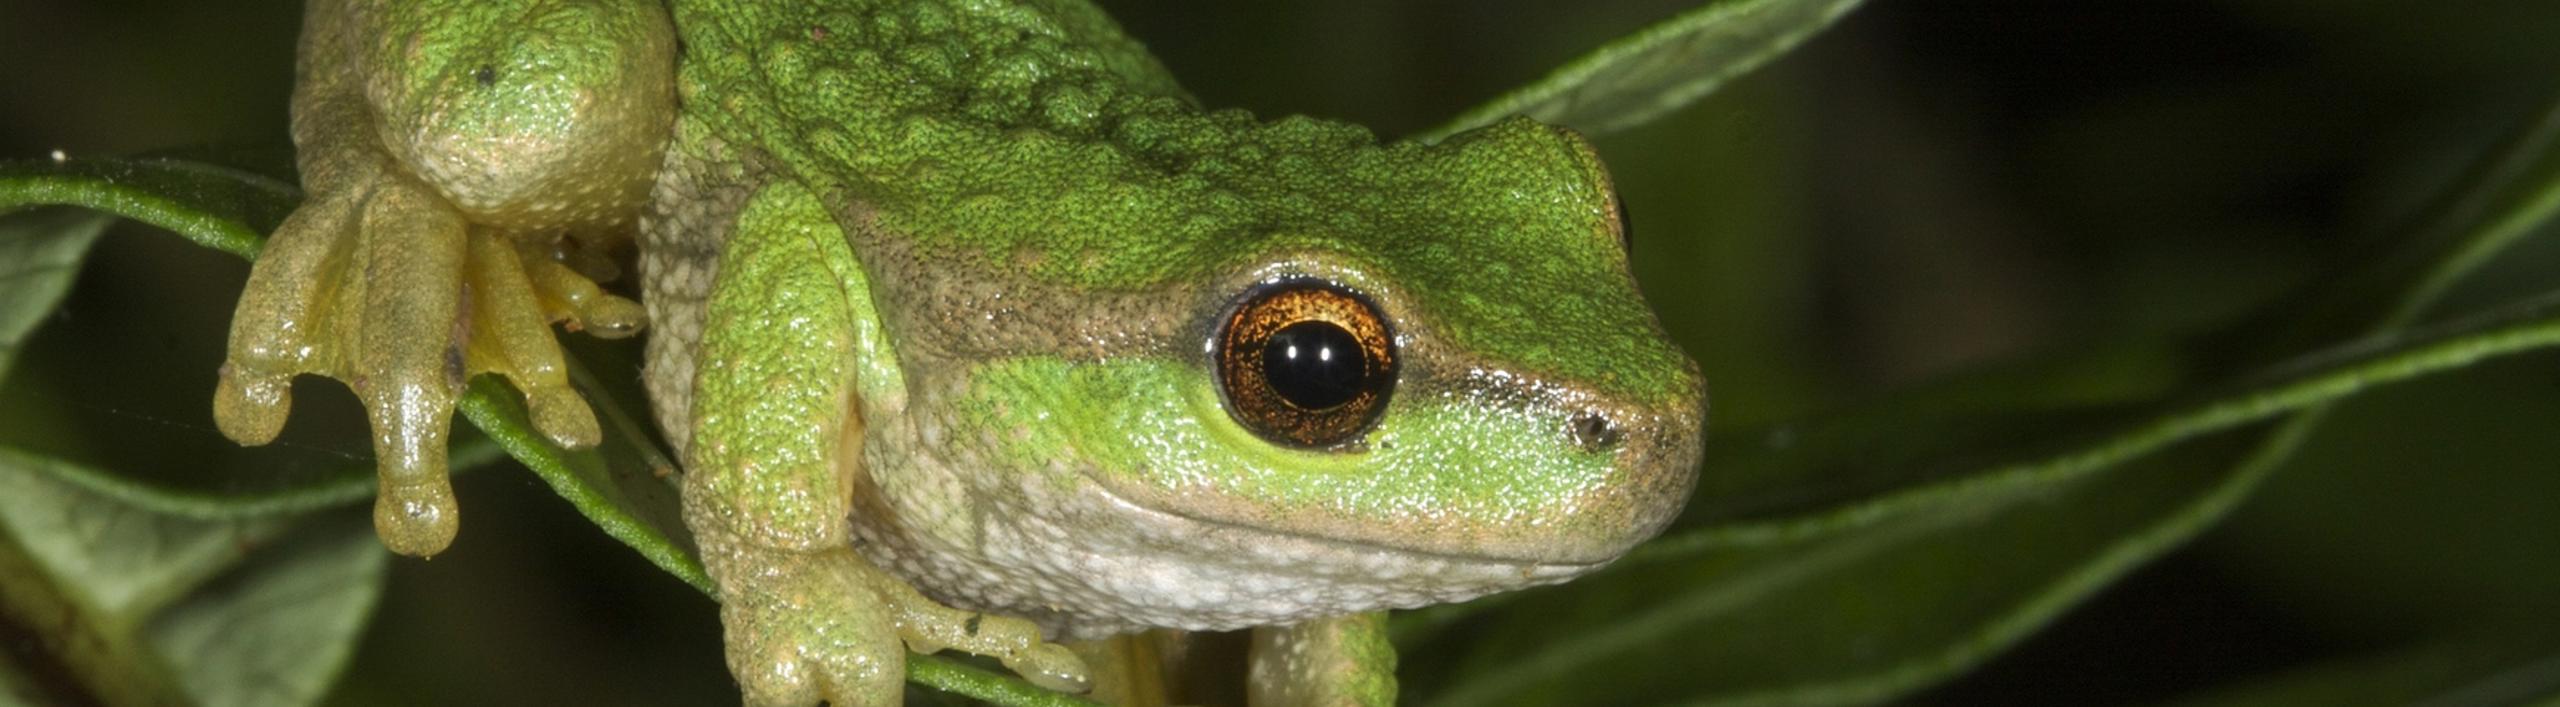 A close-up of a green frog looking side on, perching on a green leaf